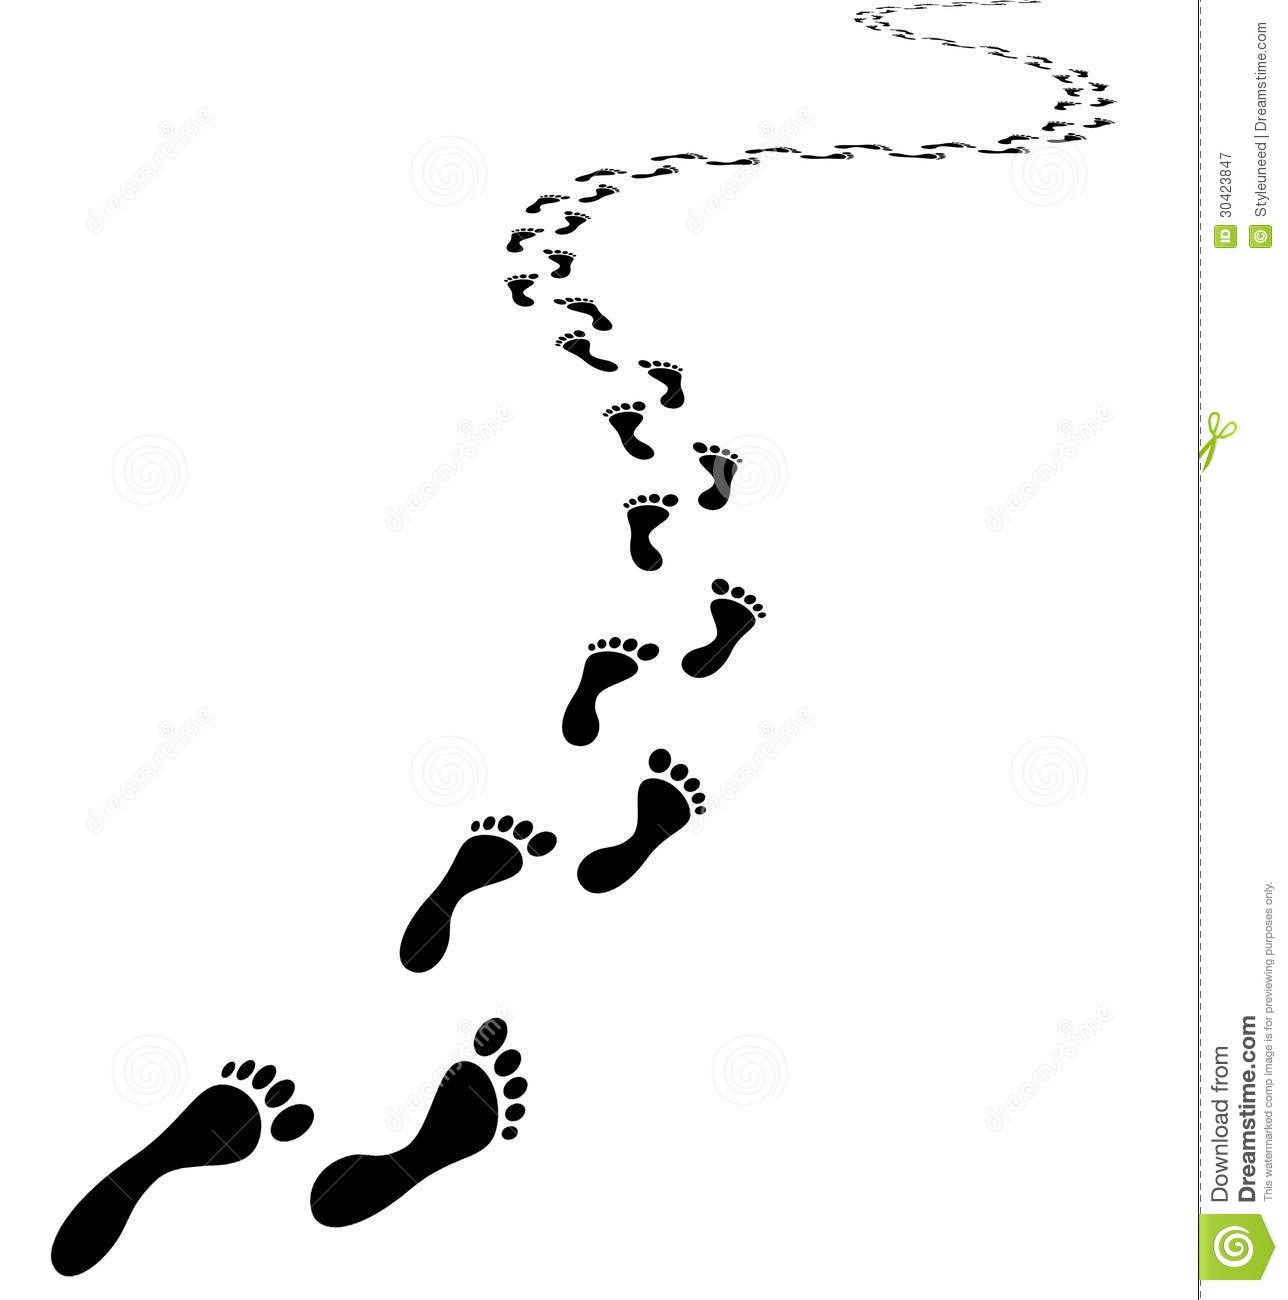 Footprint clipart pathway. With path 